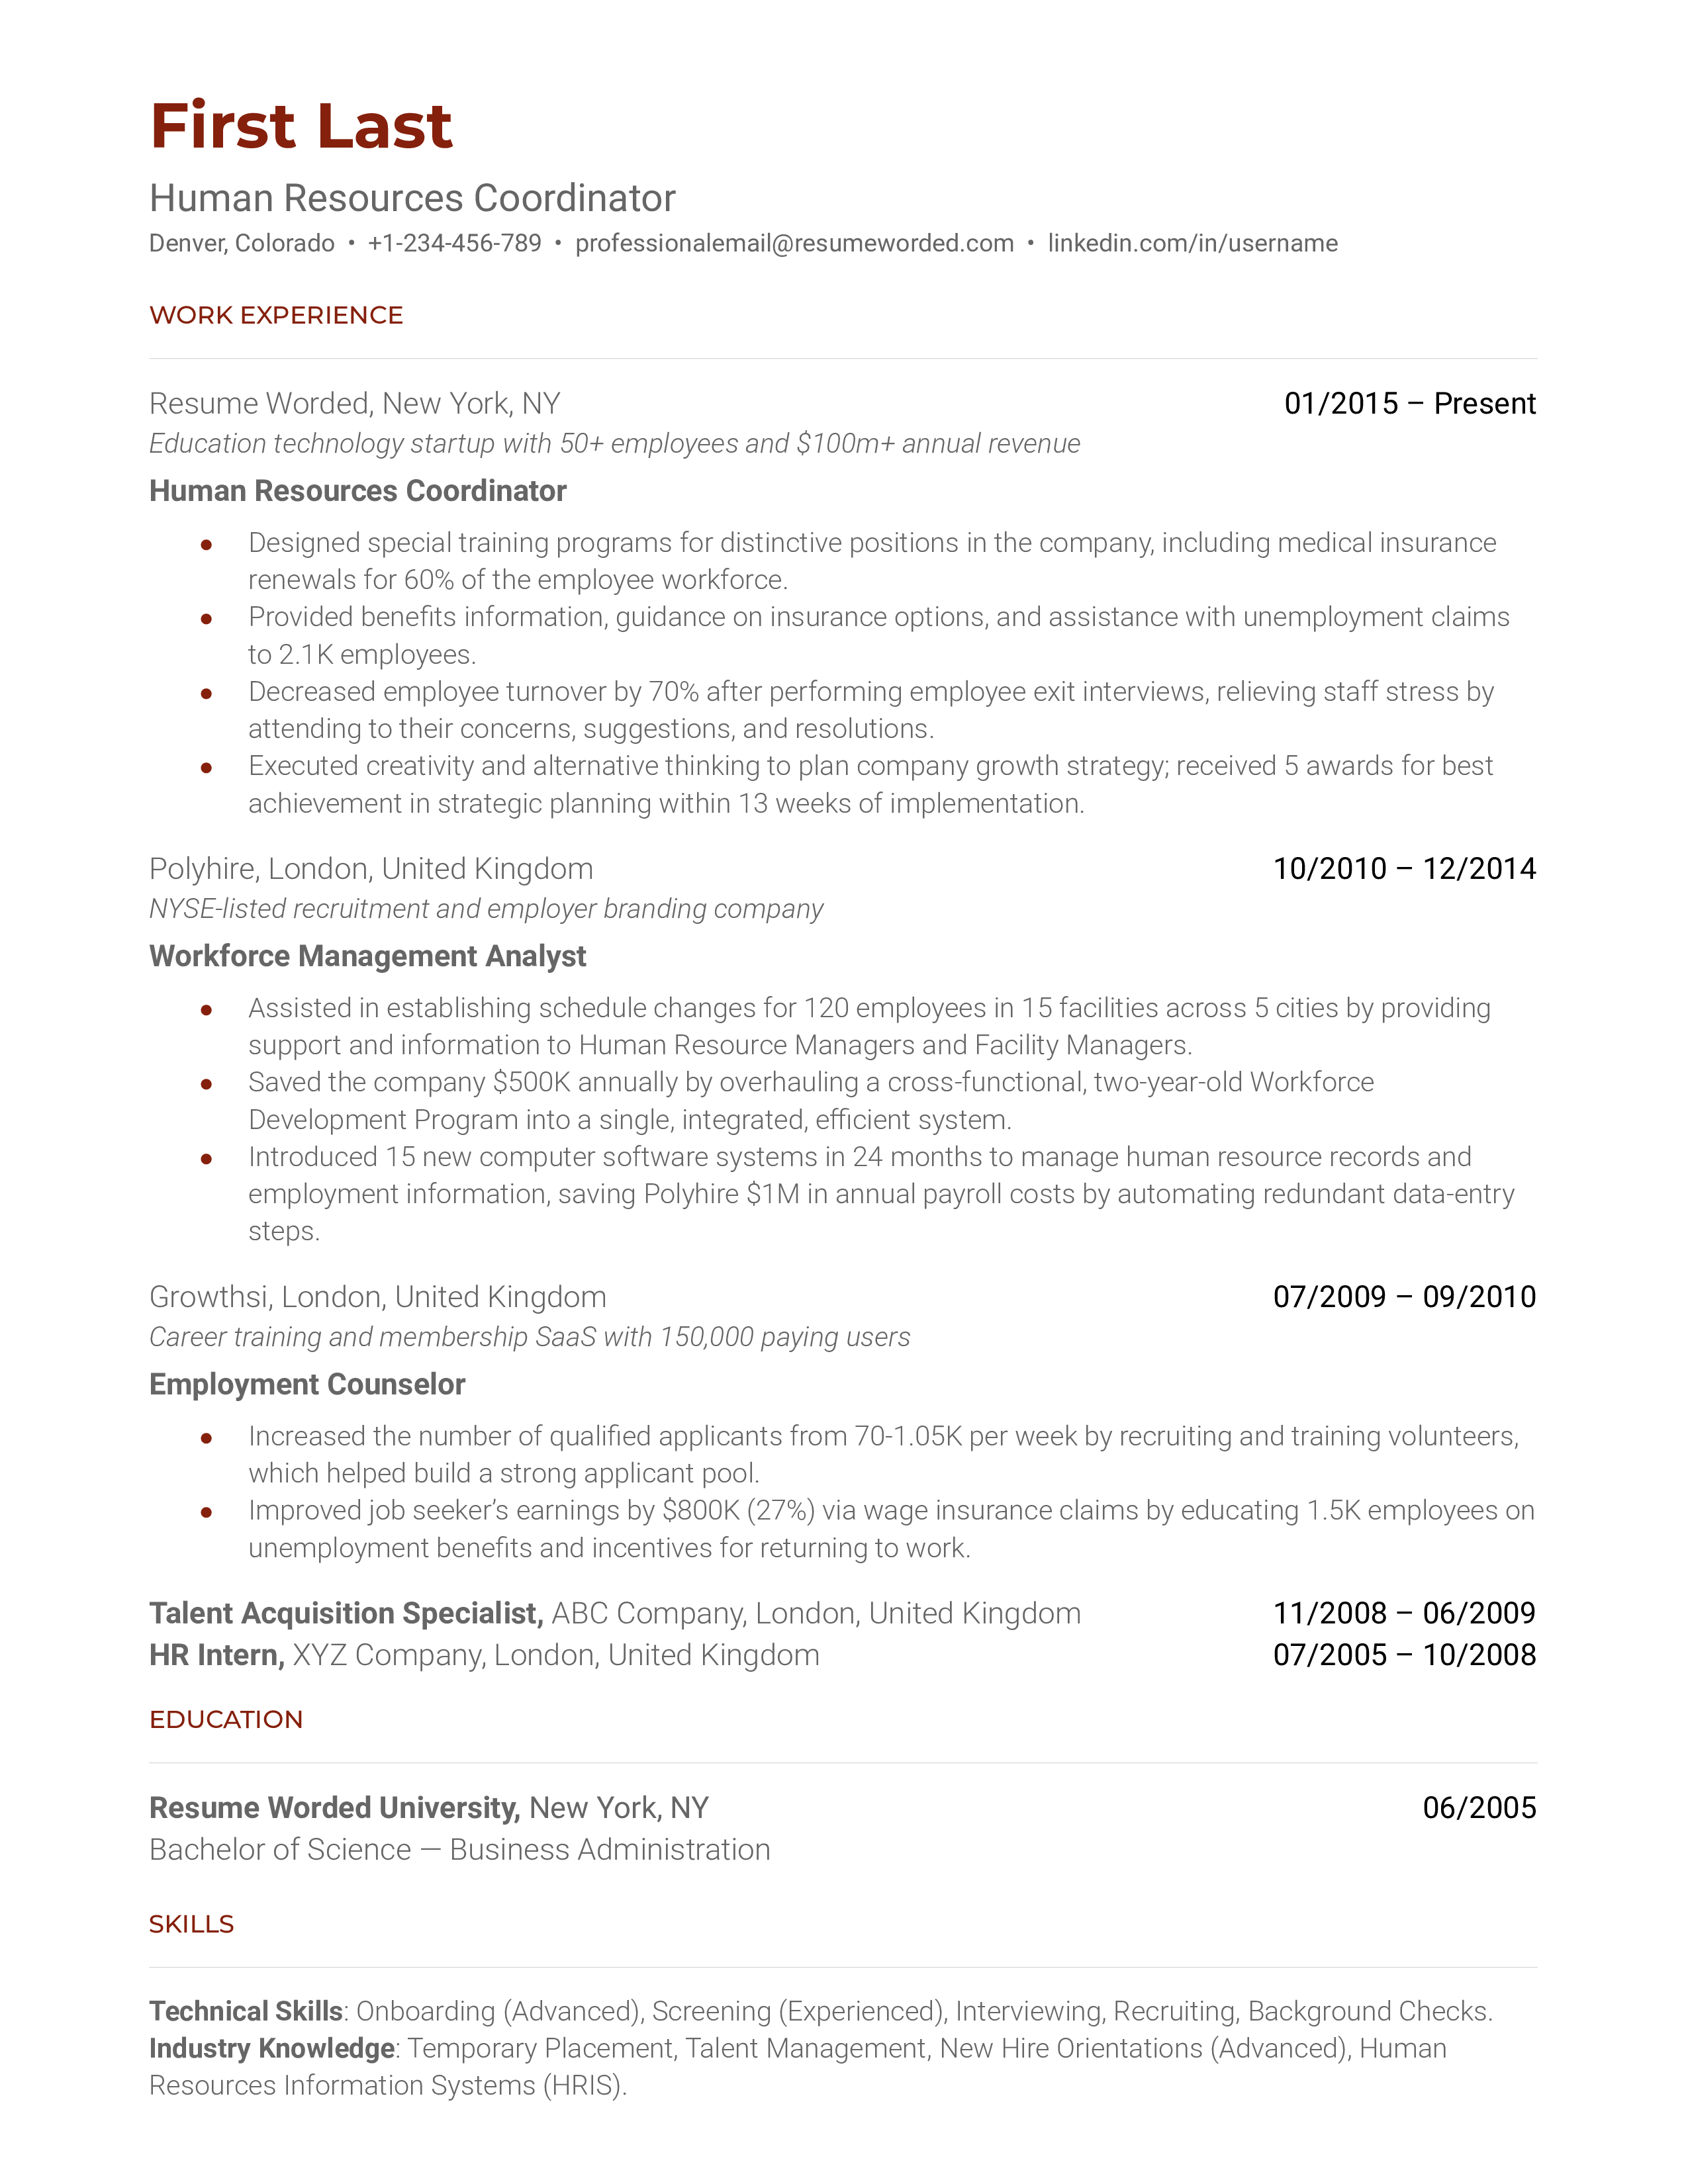 A human resources coordinator resume sample highlighting the applicant’s strong skill set and successful previous experience.